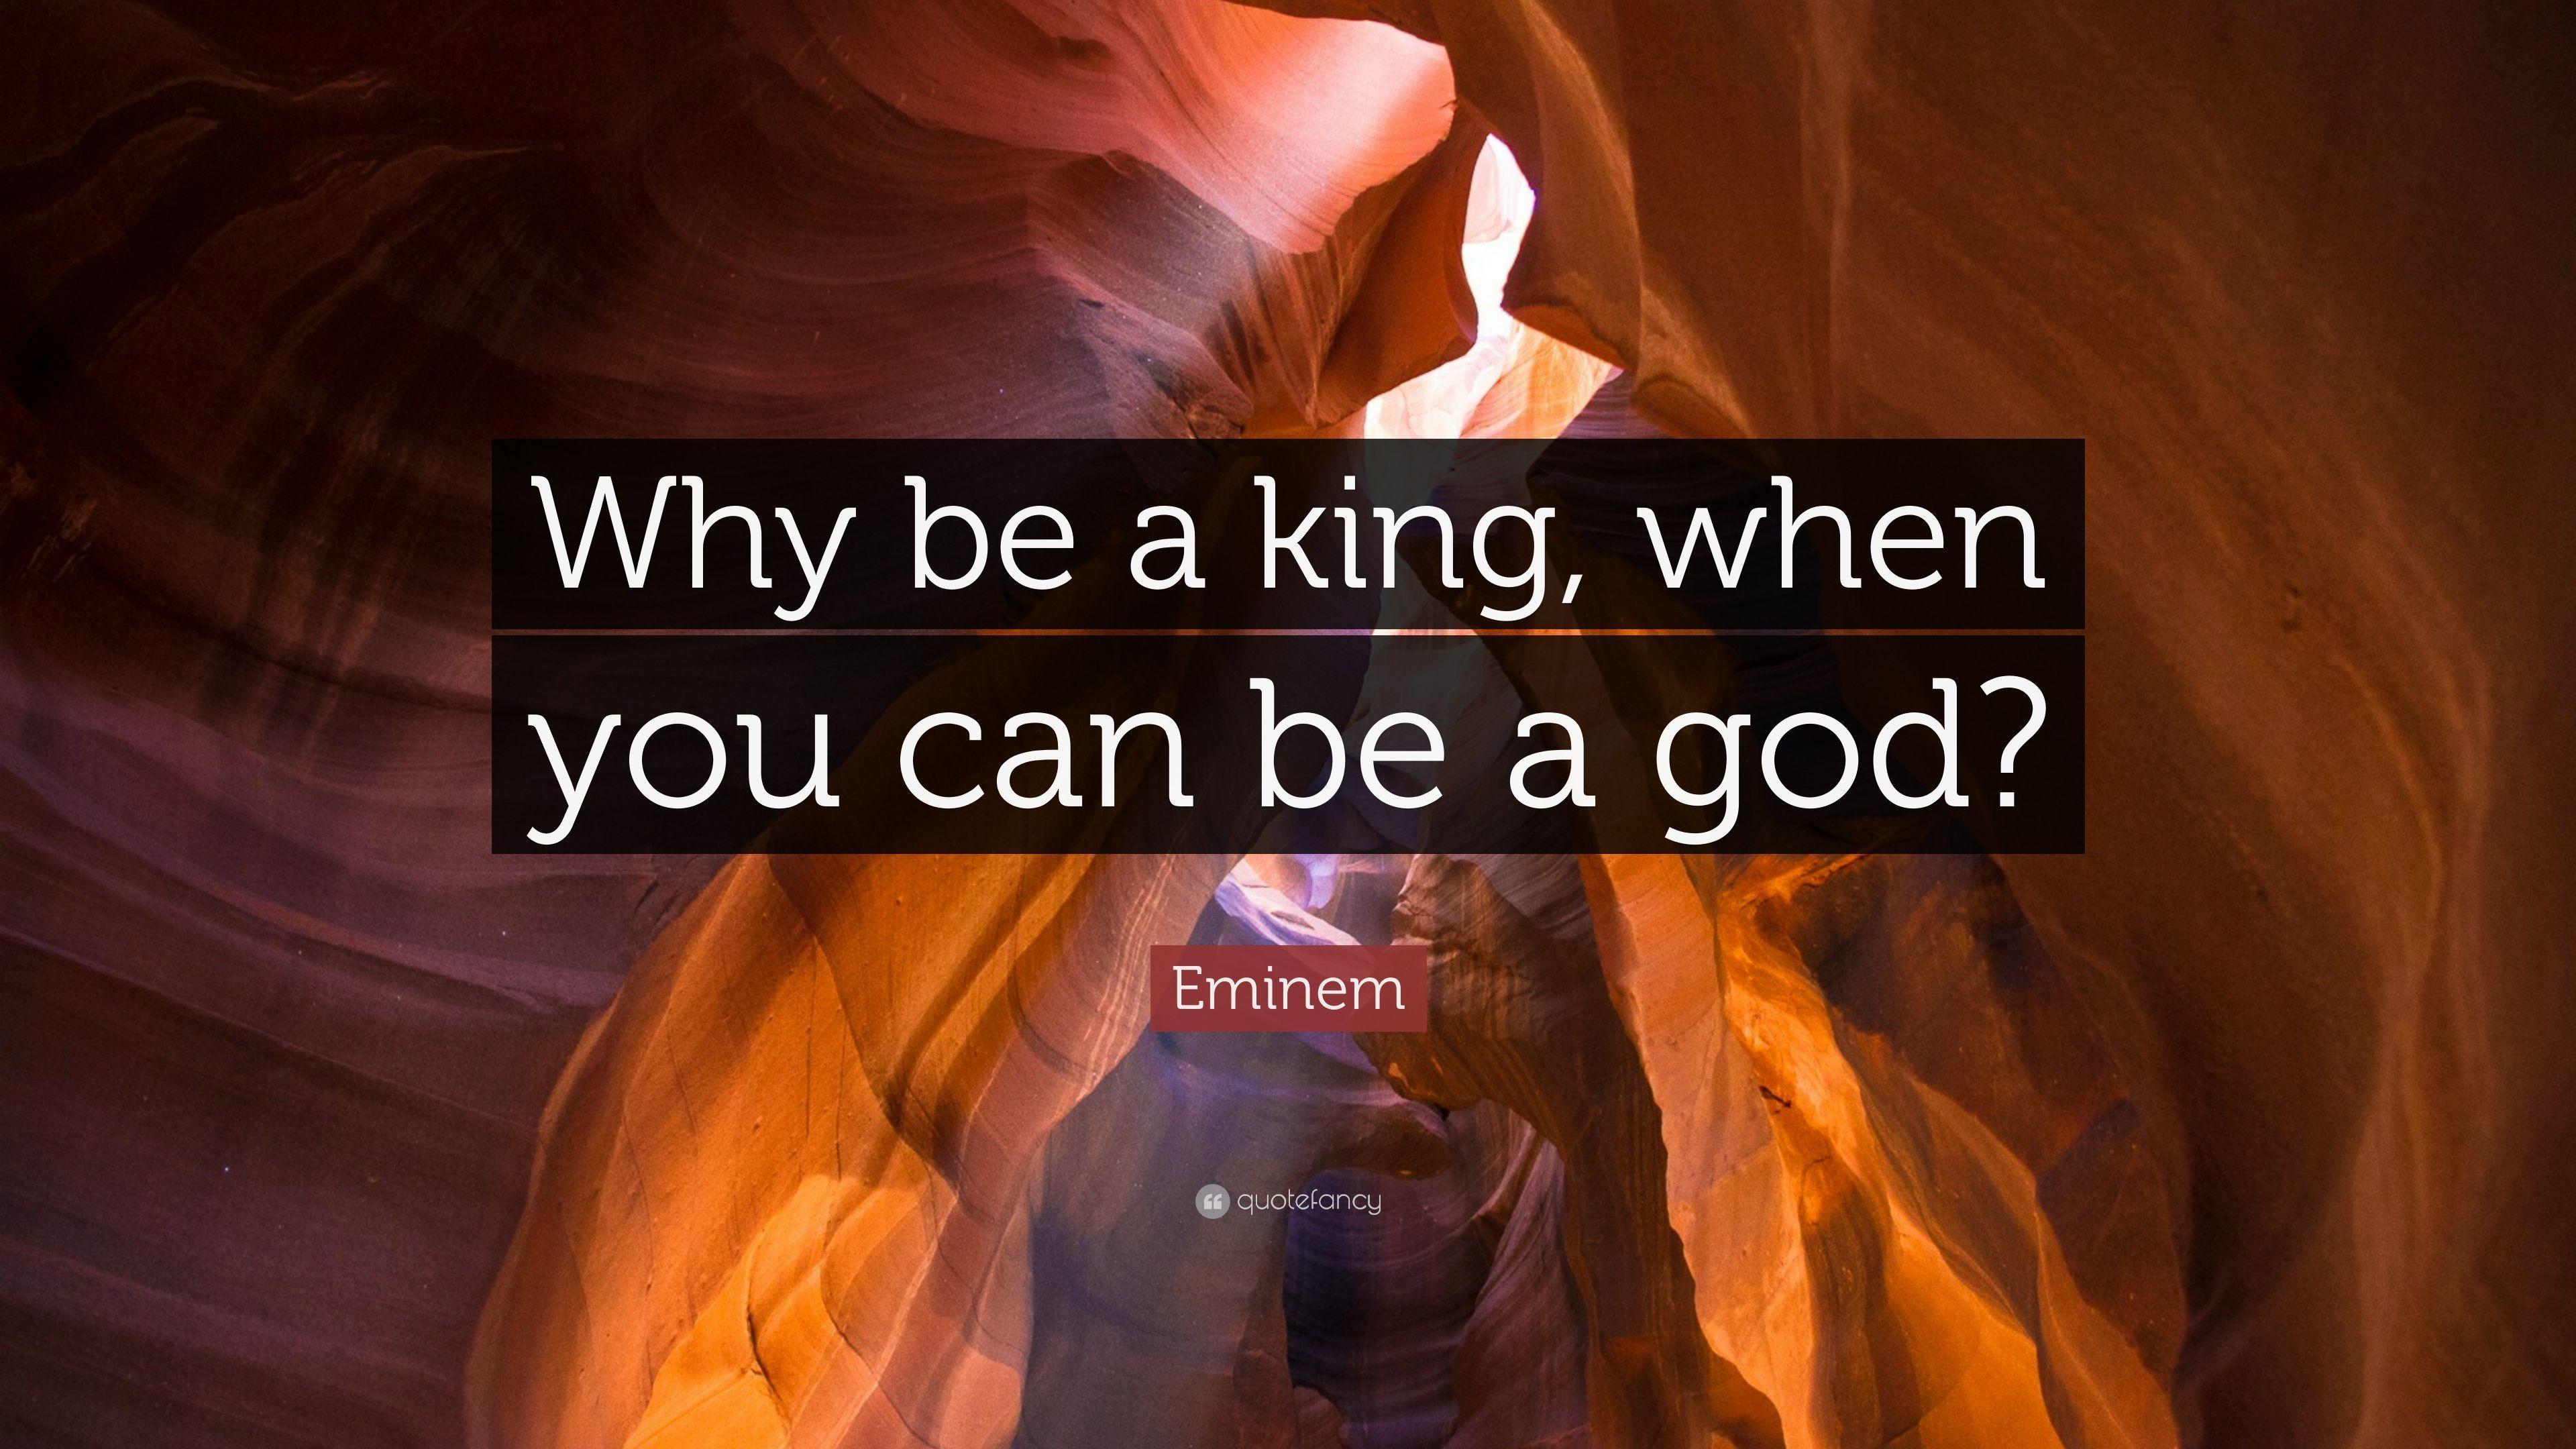 Eminem Quote: “Why be a king, when you can be a god?” 16